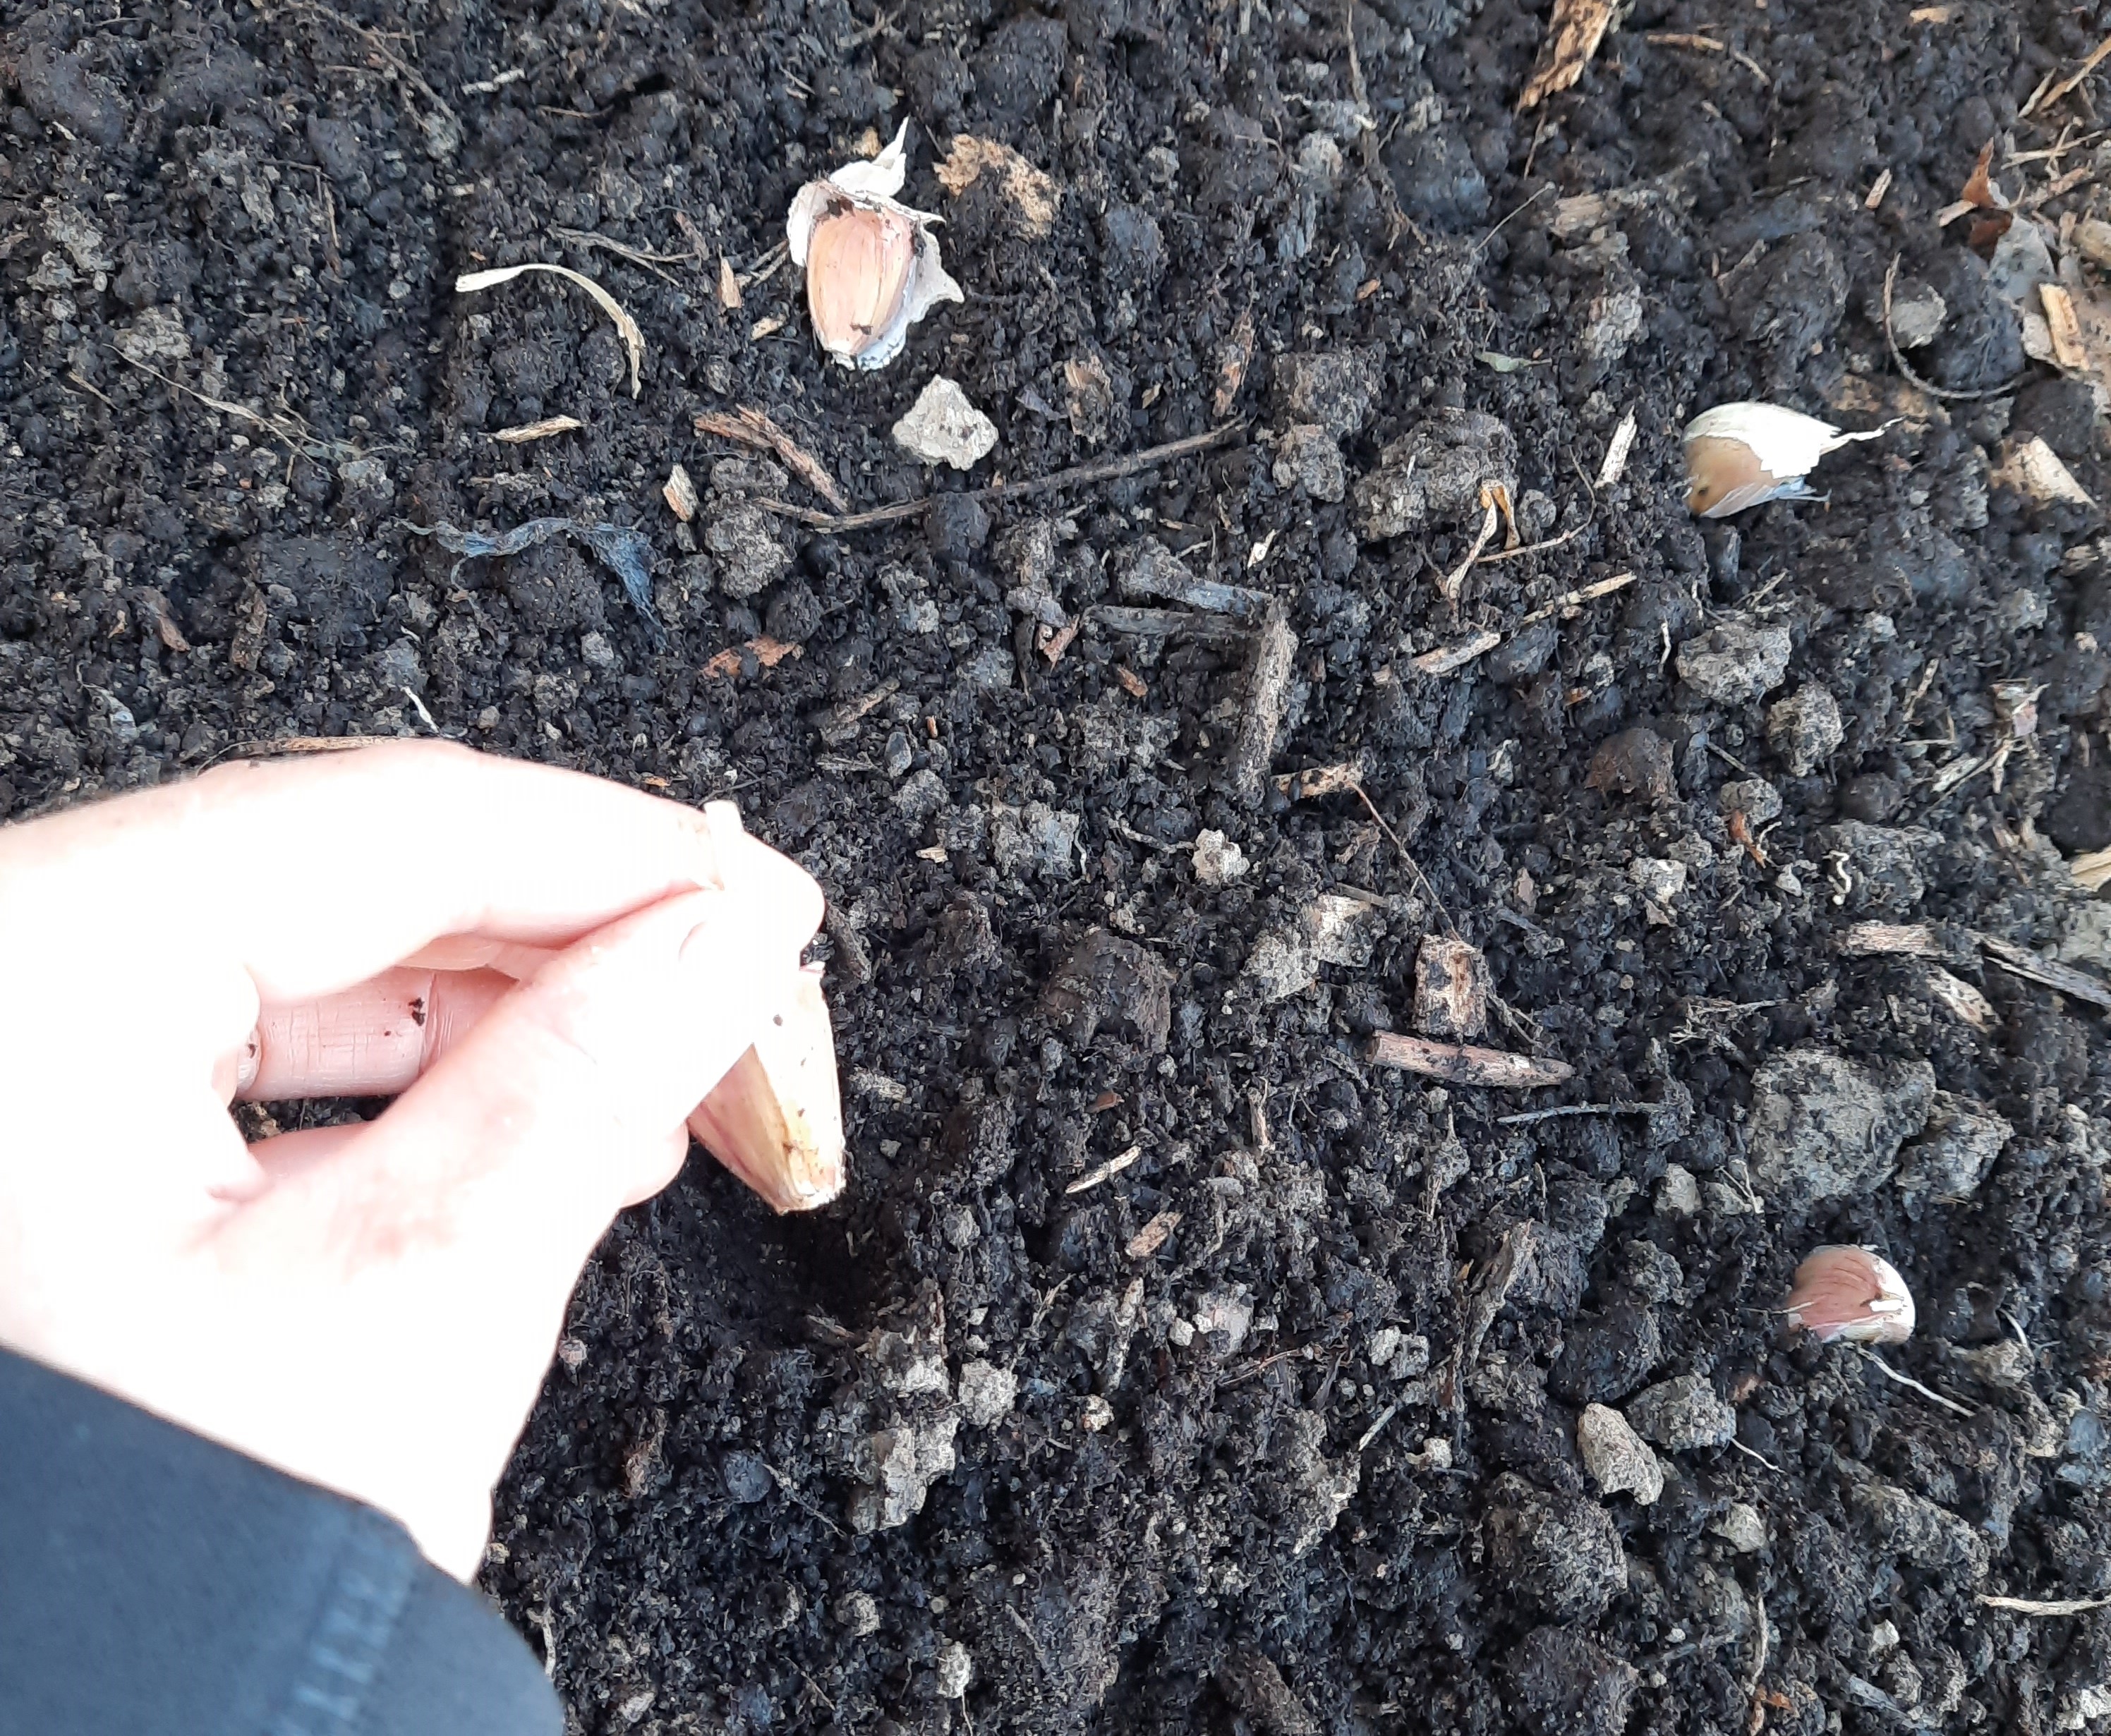 A hand arranging garlic cloves on the soil surface